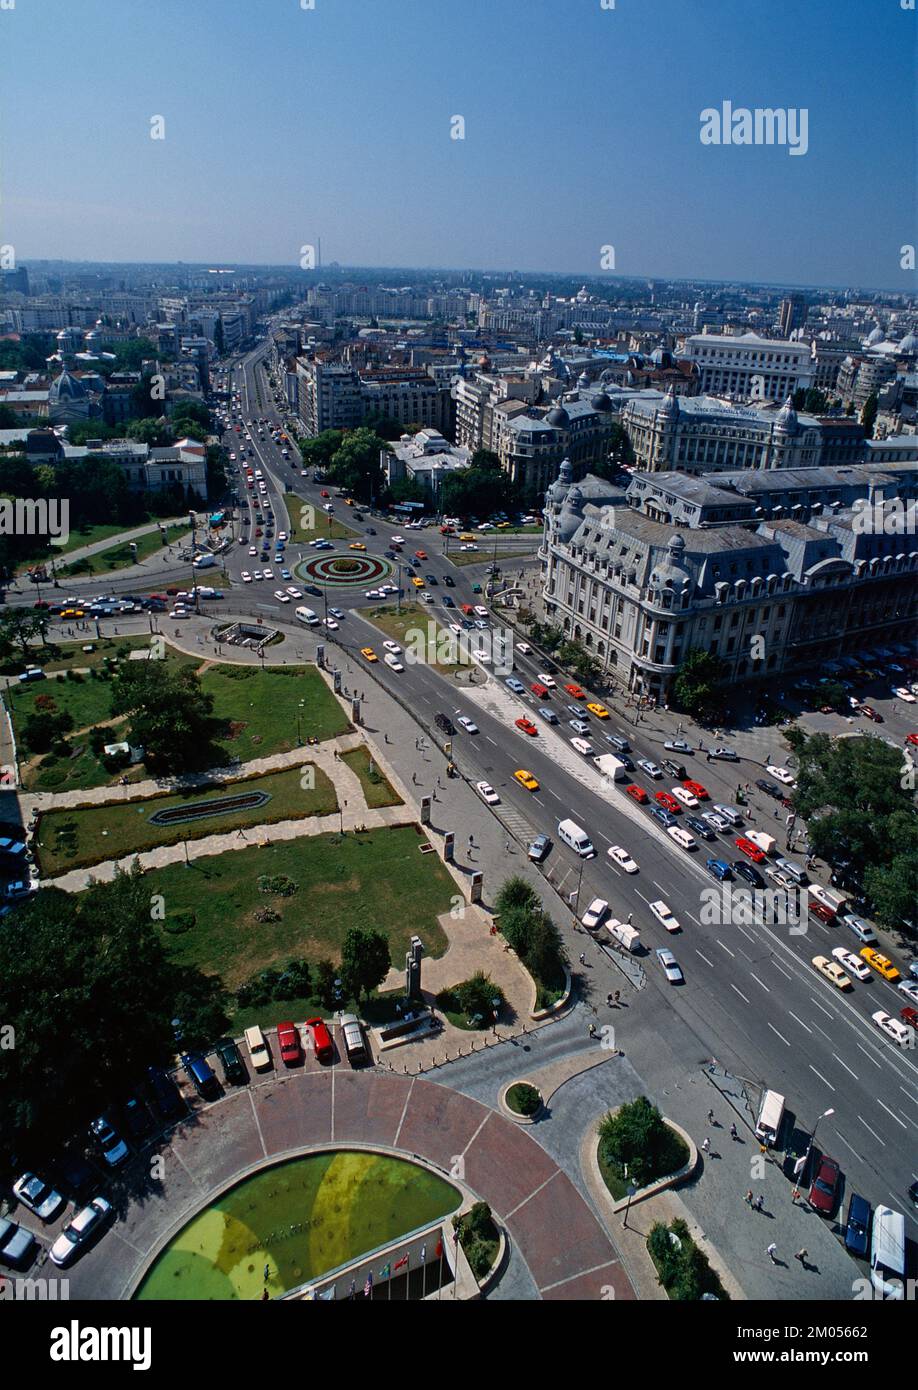 Romania. Bucharest. High viewpoint of city centre. Stock Photo